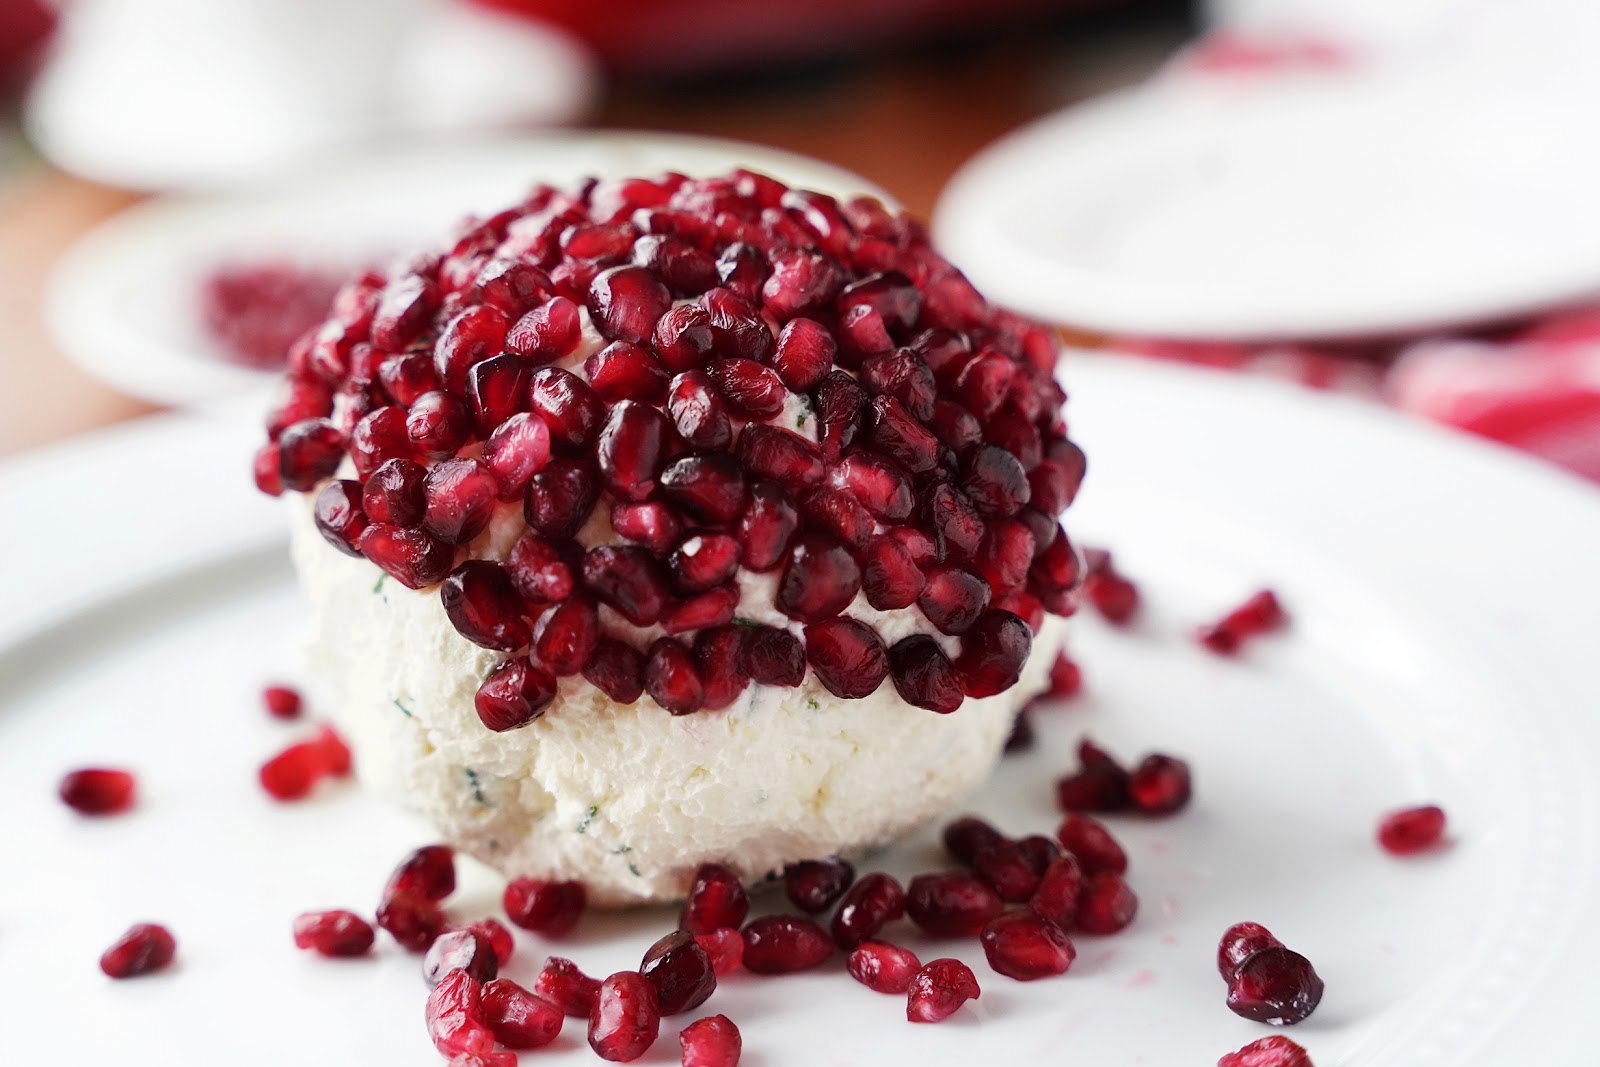 Roll the ball in pomegranate arils.